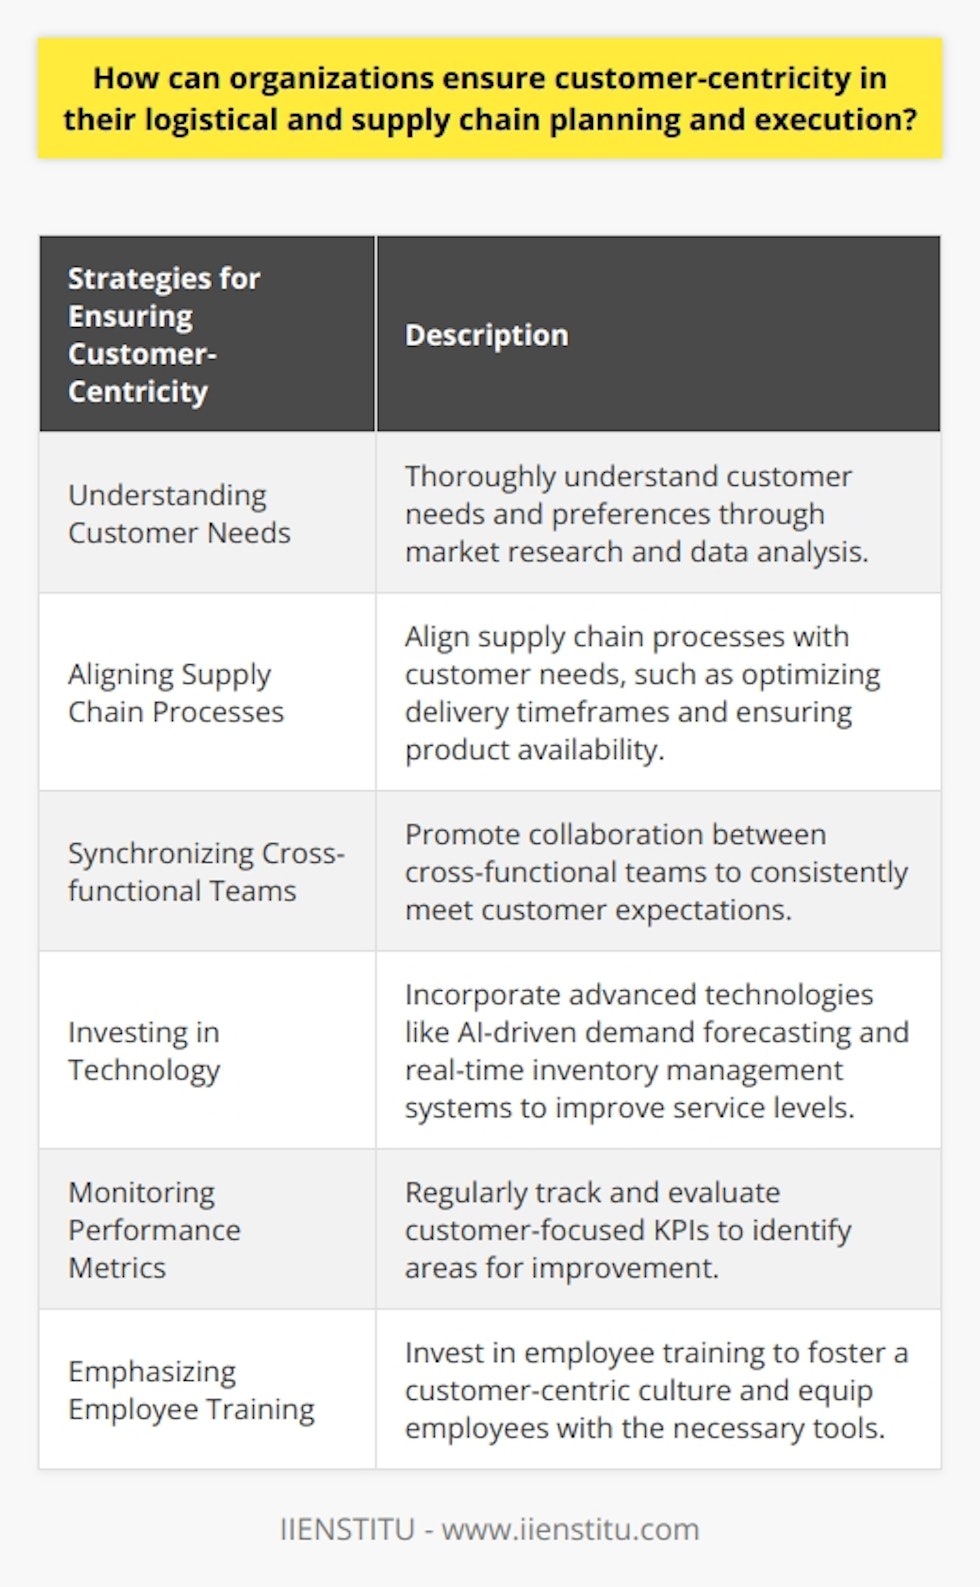 Customer-centricity is a crucial aspect of successful logistical and supply chain planning and execution for organizations. By prioritizing the needs and preferences of their customers, companies can enhance customer satisfaction, build loyalty, and drive business growth. Here are some strategies organizations can employ to ensure customer-centricity in their supply chain processes:1. Understanding Customer Needs: Thoroughly understanding customer needs and preferences is the foundation of customer-centricity. Market research and customer data analysis can provide valuable insights into customer priorities, enabling organizations to tailor their strategies accordingly.2. Aligning Supply Chain Processes: A customer-centric approach involves aligning supply chain processes with customer needs. This can include optimizing delivery timeframes, finding cost-effective shipping methods, ensuring product availability, and maintaining adequate inventory levels to minimize order cancellations.3. Synchronizing Cross-functional Teams: Collaboration between cross-functional teams, such as sales, marketing, and operations, is crucial for promoting customer-centricity throughout the supply chain. Regular communication and coordination ensure that all team members work together in a synchronized manner, meeting customer expectations consistently.4. Investing in Technology: Incorporating advanced technologies can significantly enhance an organization's ability to meet customer demands. Artificial intelligence-driven demand forecasting, warehouse automation, and real-time inventory management systems enable companies to provide accurate and timely information to customers, reducing lead times and improving overall service levels.5. Monitoring Performance Metrics: Regularly tracking and evaluating customer-focused key performance indicators (KPIs) allows organizations to monitor their progress toward achieving customer-centricity. Metrics such as on-time delivery rates and order accuracy help identify gaps in processes and make data-driven improvements.6. Emphasizing Employee Training: Investing in employee training and development is essential for fostering a customer-centric culture. Training programs should reinforce customer-centric best practices and equip employees with the tools to effectively prioritize and address customer needs throughout the supply chain.In summary, organizations can achieve customer-centricity in their logistical and supply chain planning and execution by understanding customer needs, aligning processes, promoting collaboration, investing in technology, monitoring performance metrics, and emphasizing employee training. By adopting these strategies, organizations can deliver exceptional experiences for their customers, resulting in long-term relationships and business success.